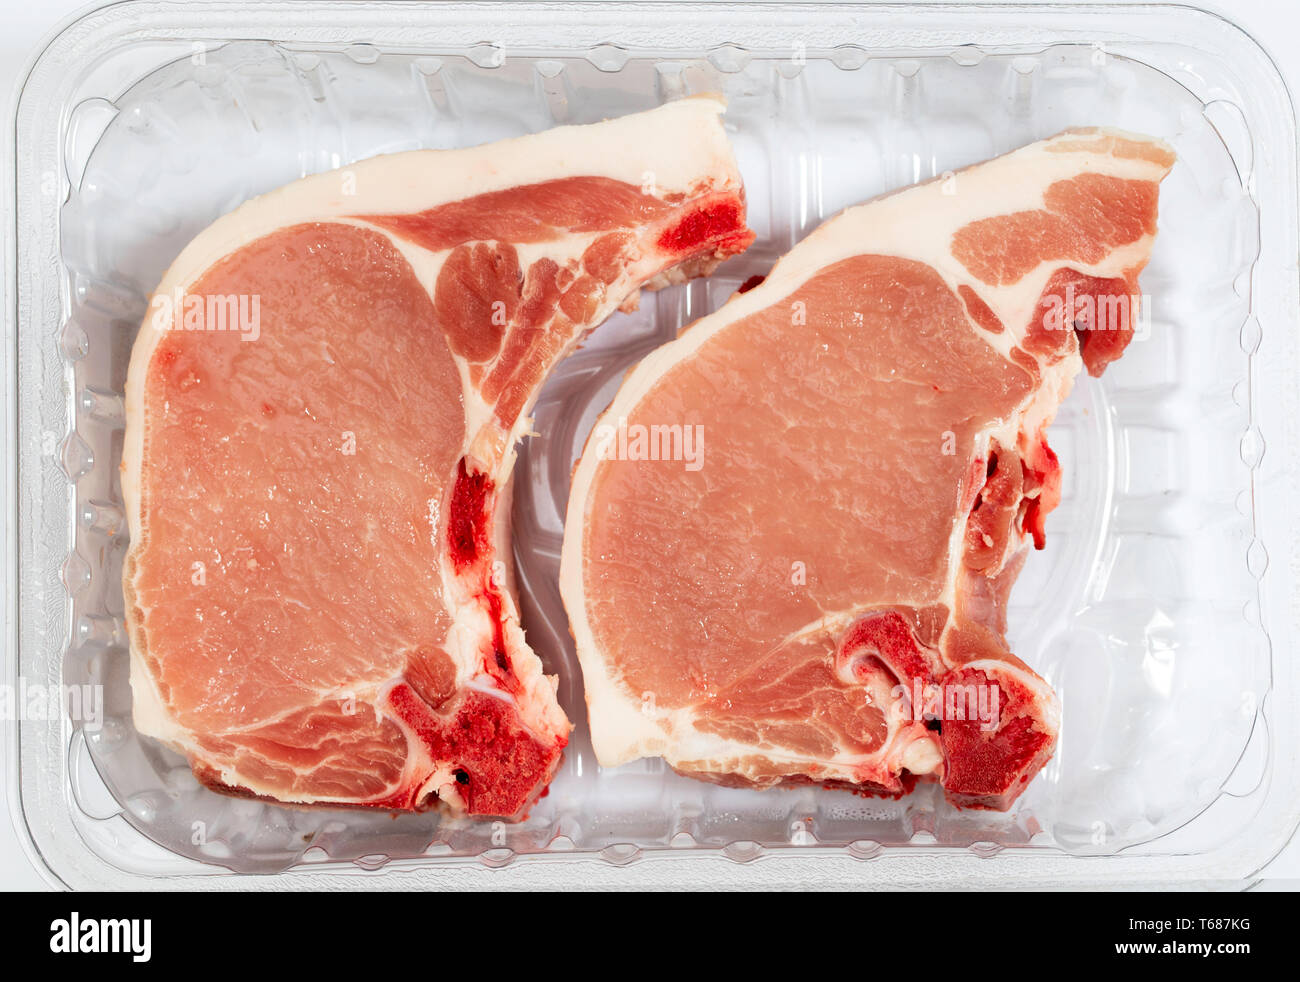 Two pork loin chops in a plastic butcher's tray Stock Photo